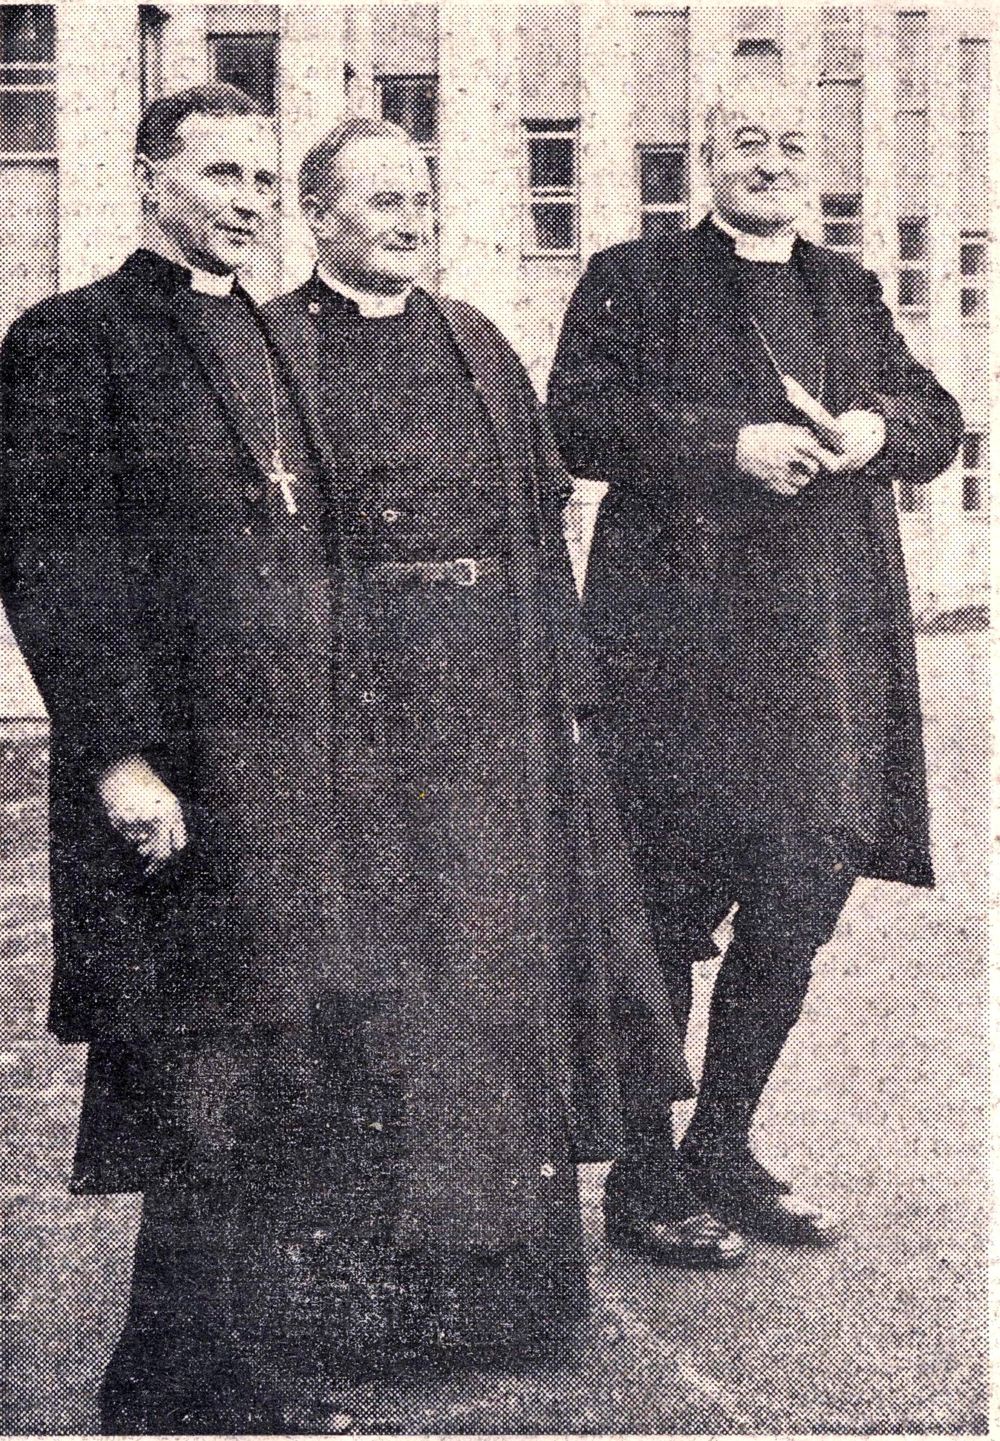 Most Revd G.O. Simms, Archbishop of Dublin, Revd John Brown, Warden of the Hostel, and the Most Revd J. McCann, Archbishop of Armagh at the opening, Church of Ireland Gazette, 21 February 1964